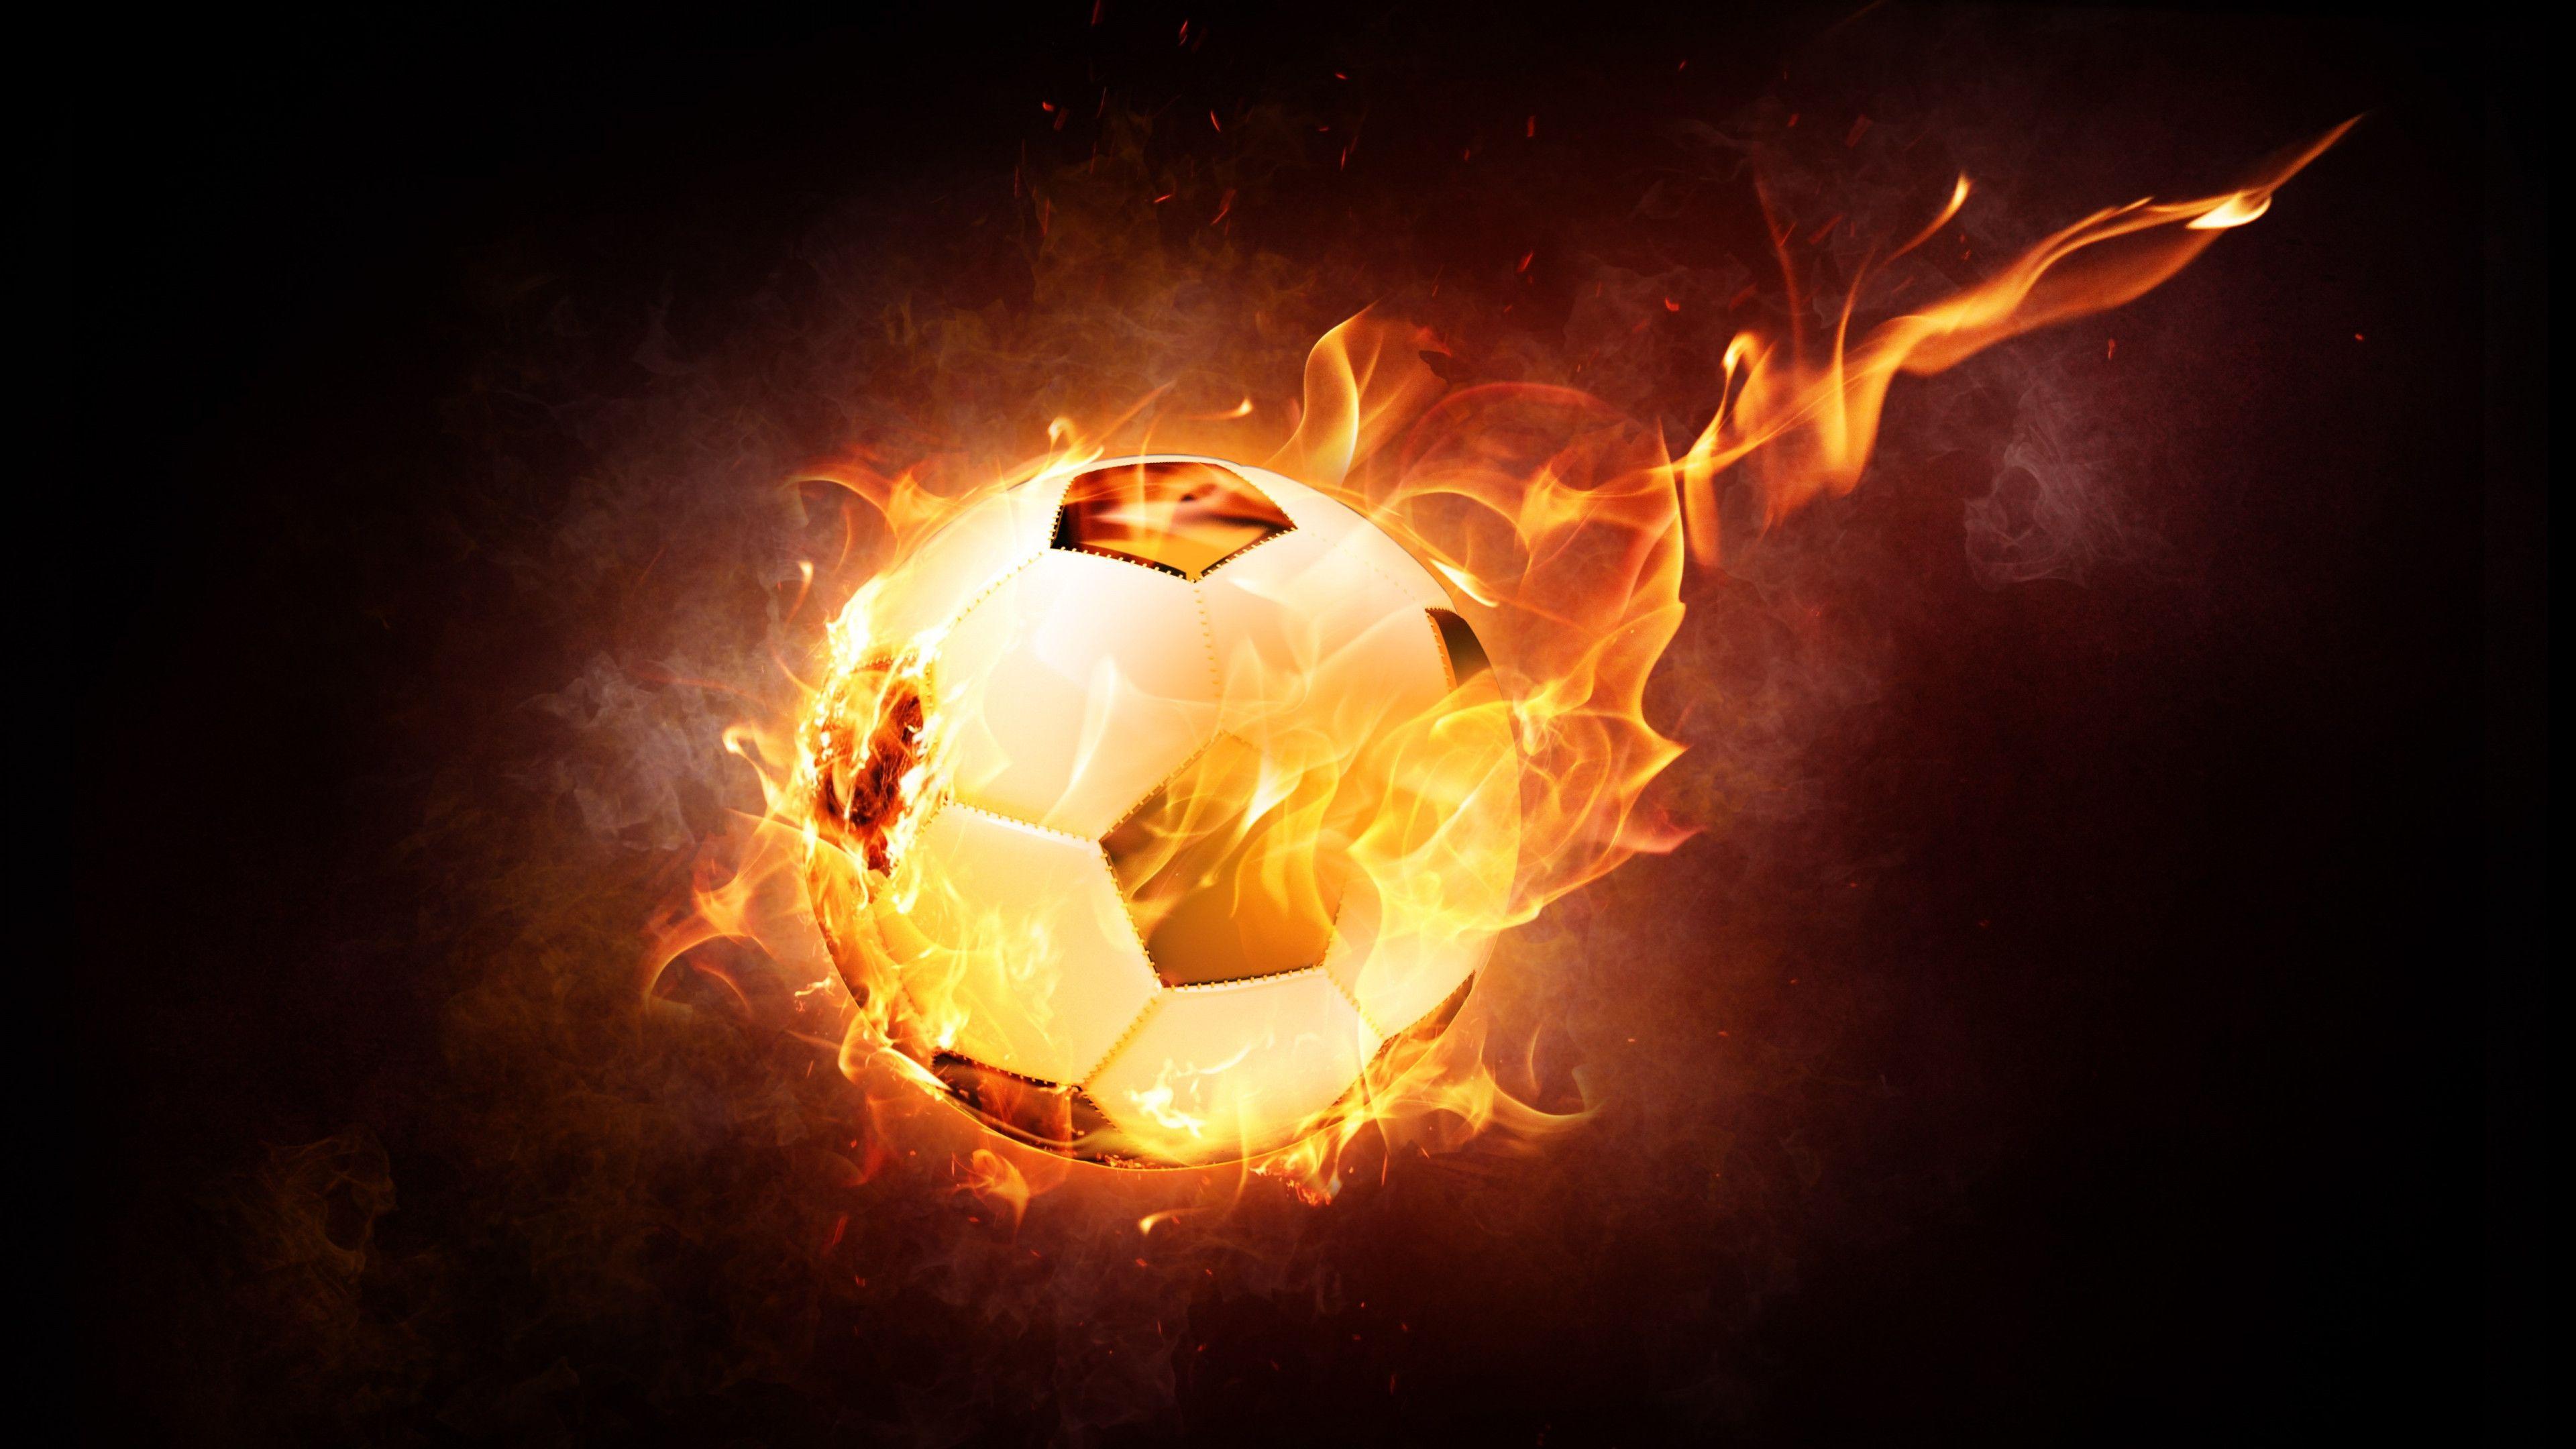 Fire Football Images Browse 45611 Stock Photos  Vectors Free Download  with Trial  Shutterstock